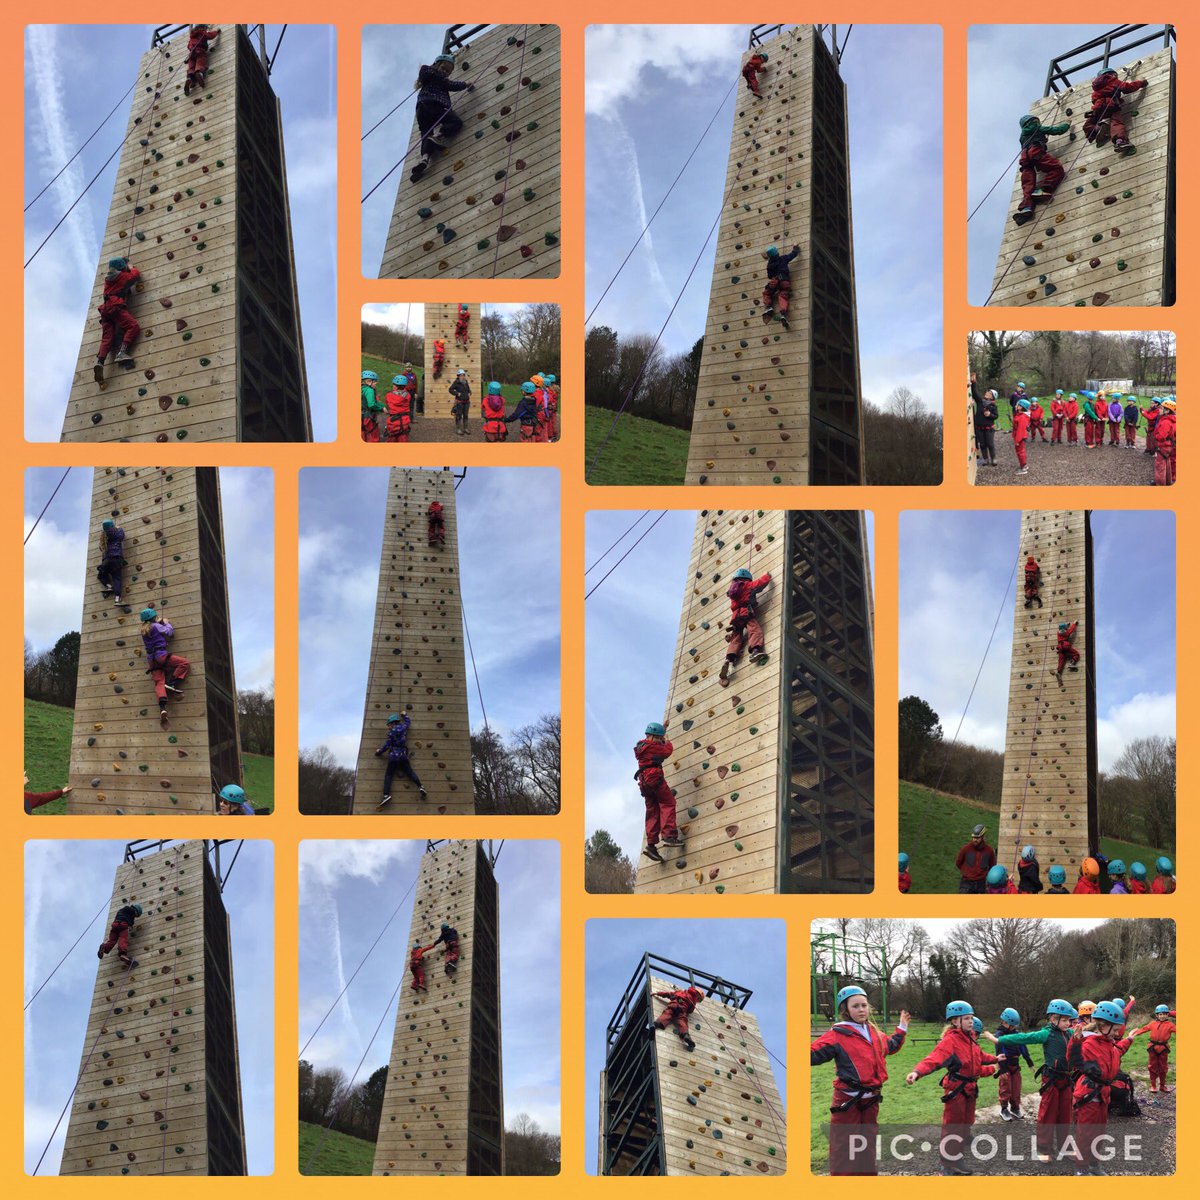 The second half of Dosbarth 4 really enjoyed the climbing, zip wire and low ropes today , but especially enjoyed the mud! @EAS_Equity @CentreLongtown @MonLifeOfficial @MonFaithFamily